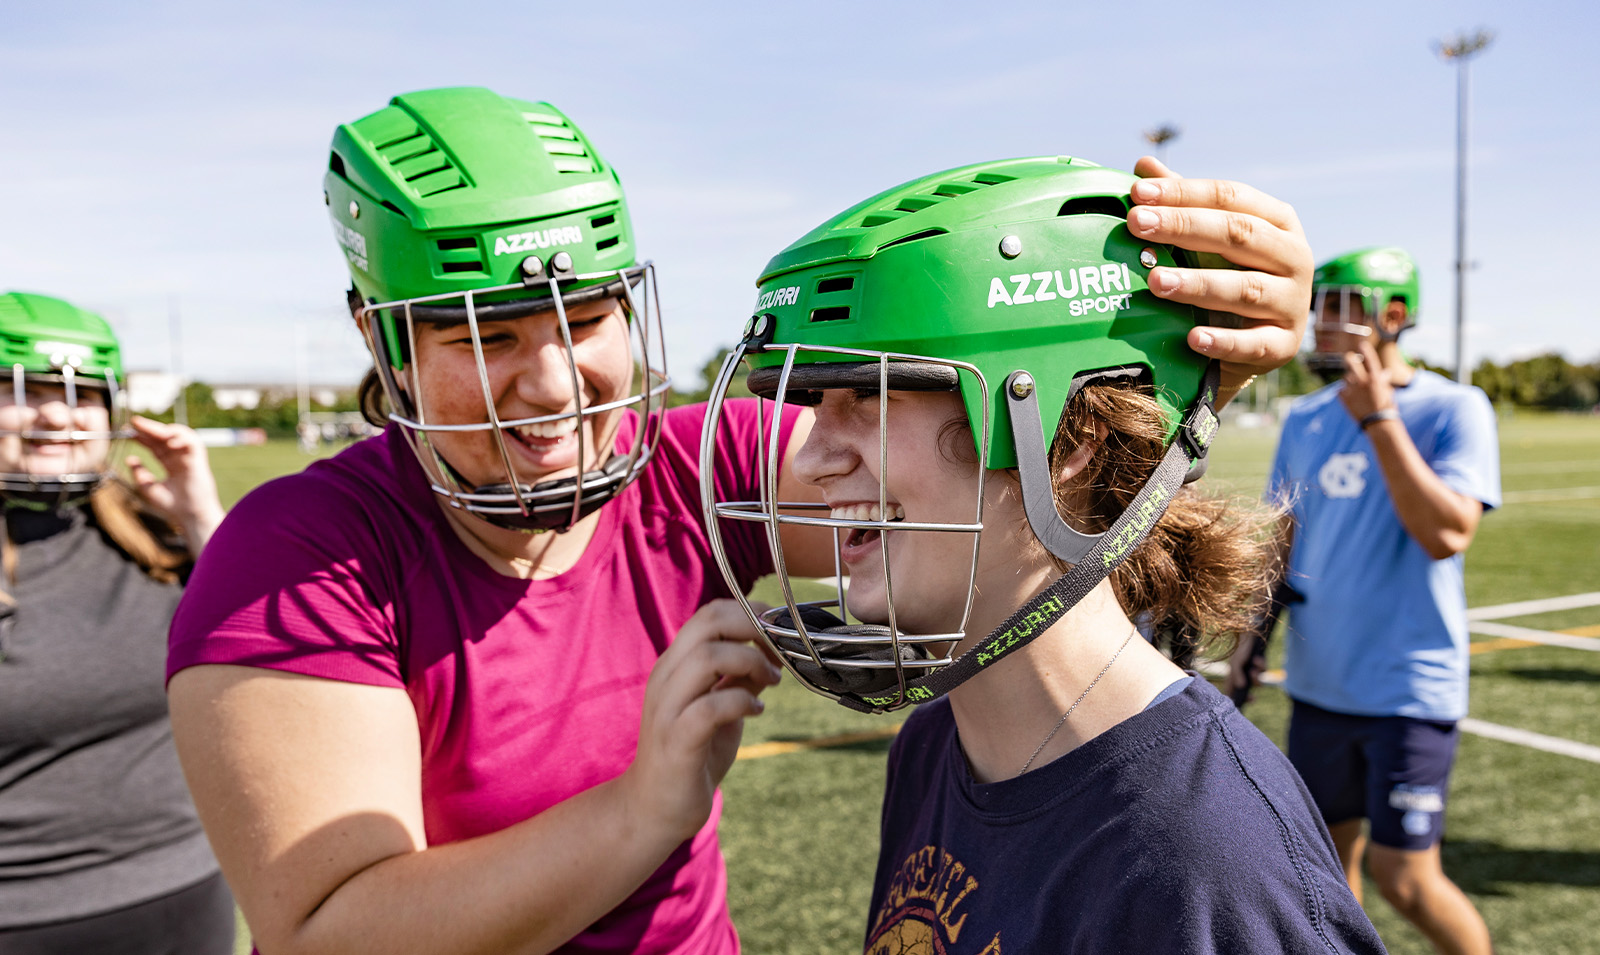 A student helping another student put on her helmet before practicing a sport called hurling.